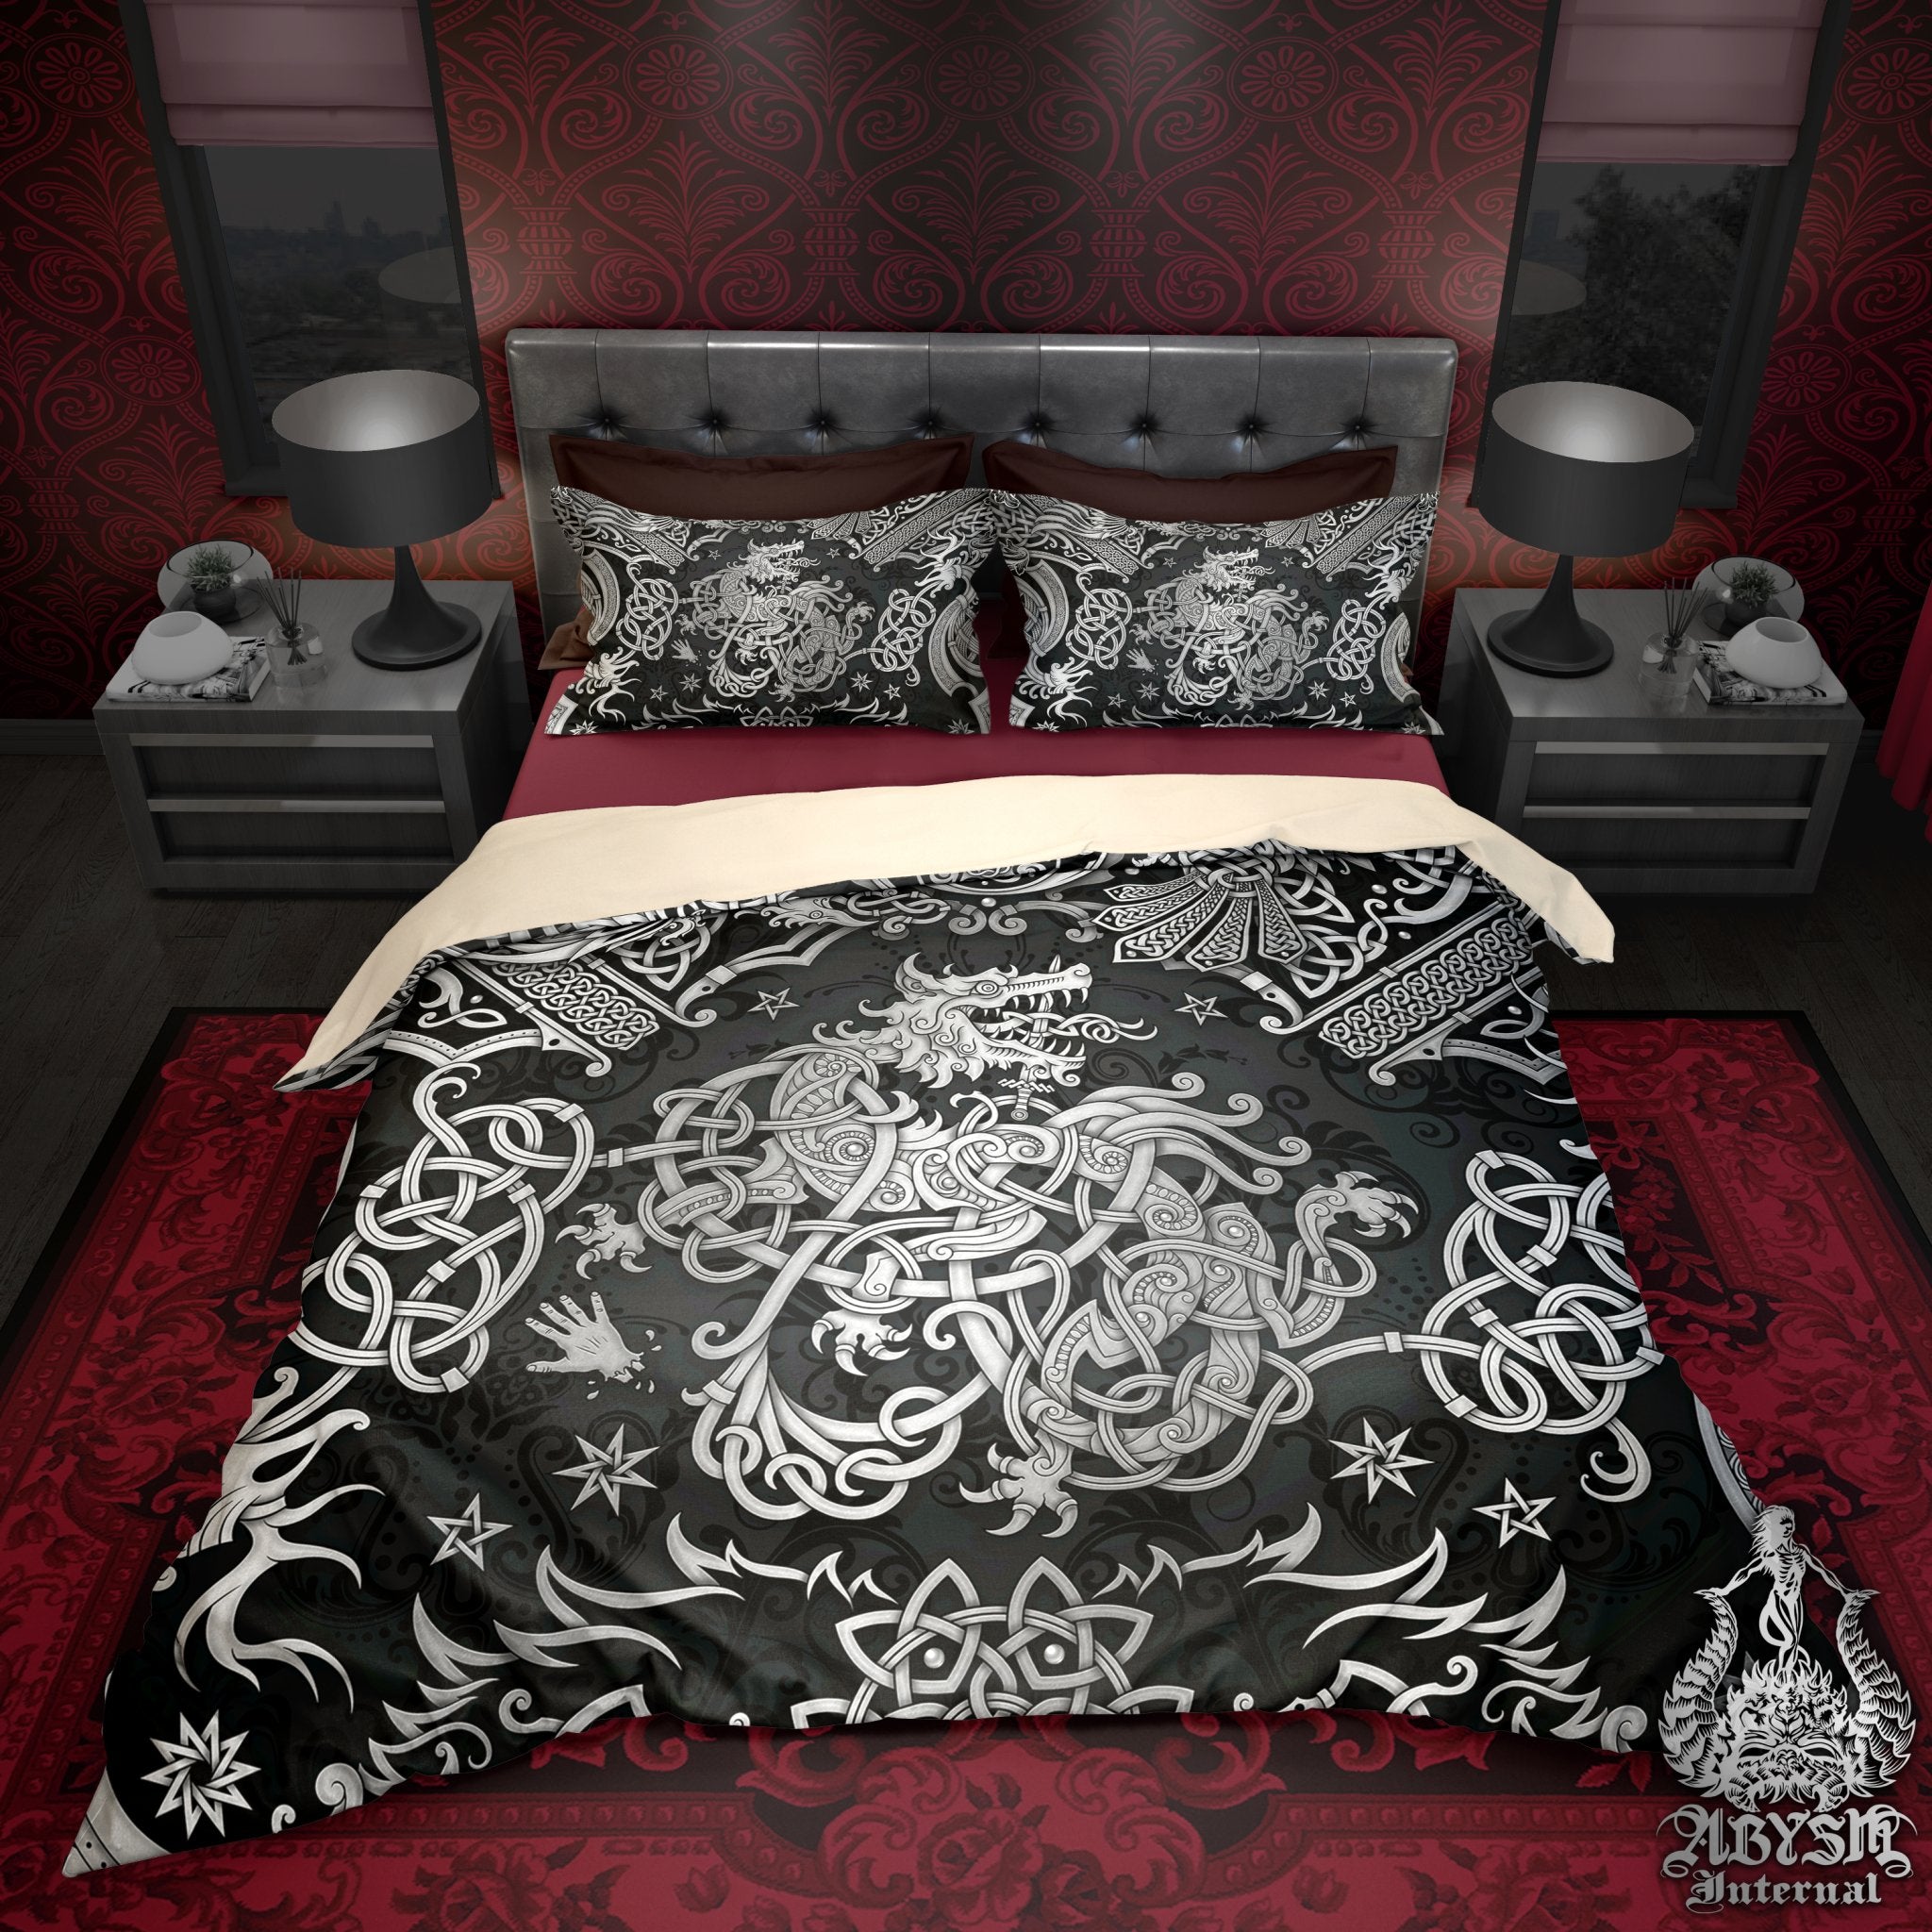 Viking Bedding Set, Comforter or Duvet, Norse Wolf Bed Cover and Bedroom Decor, Viking Art Print, King, Queen & Twin Size - Dark - Abysm Internal